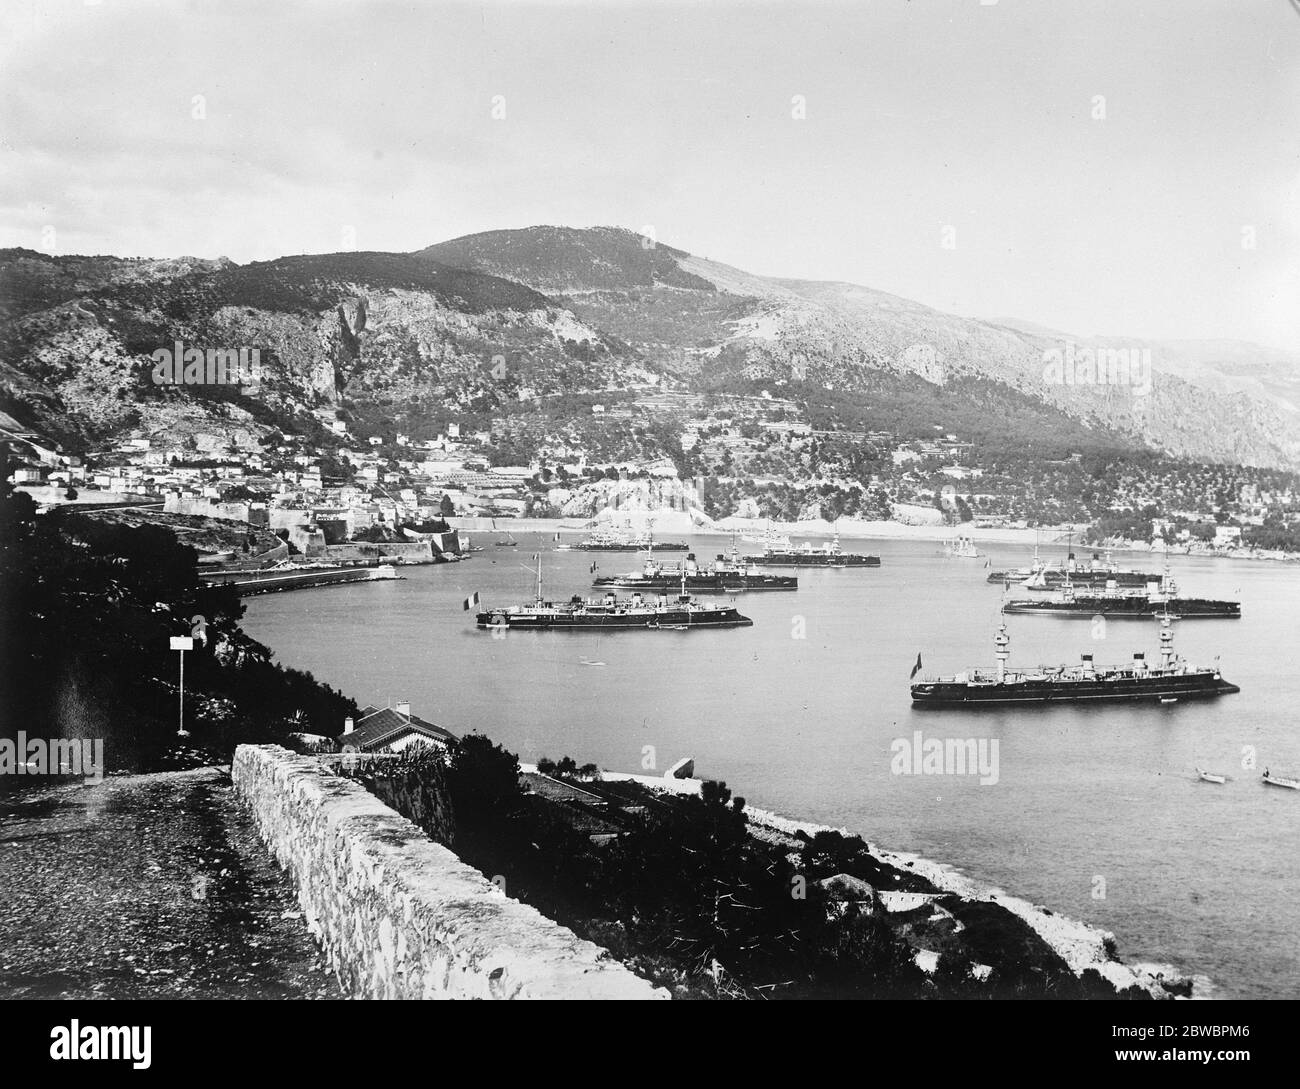 The Royal yacht expected to put in at Villefranche harbour to await King George and Queen Mary . The town and roadstead of Villefranche . 11 March 1925 Stock Photo